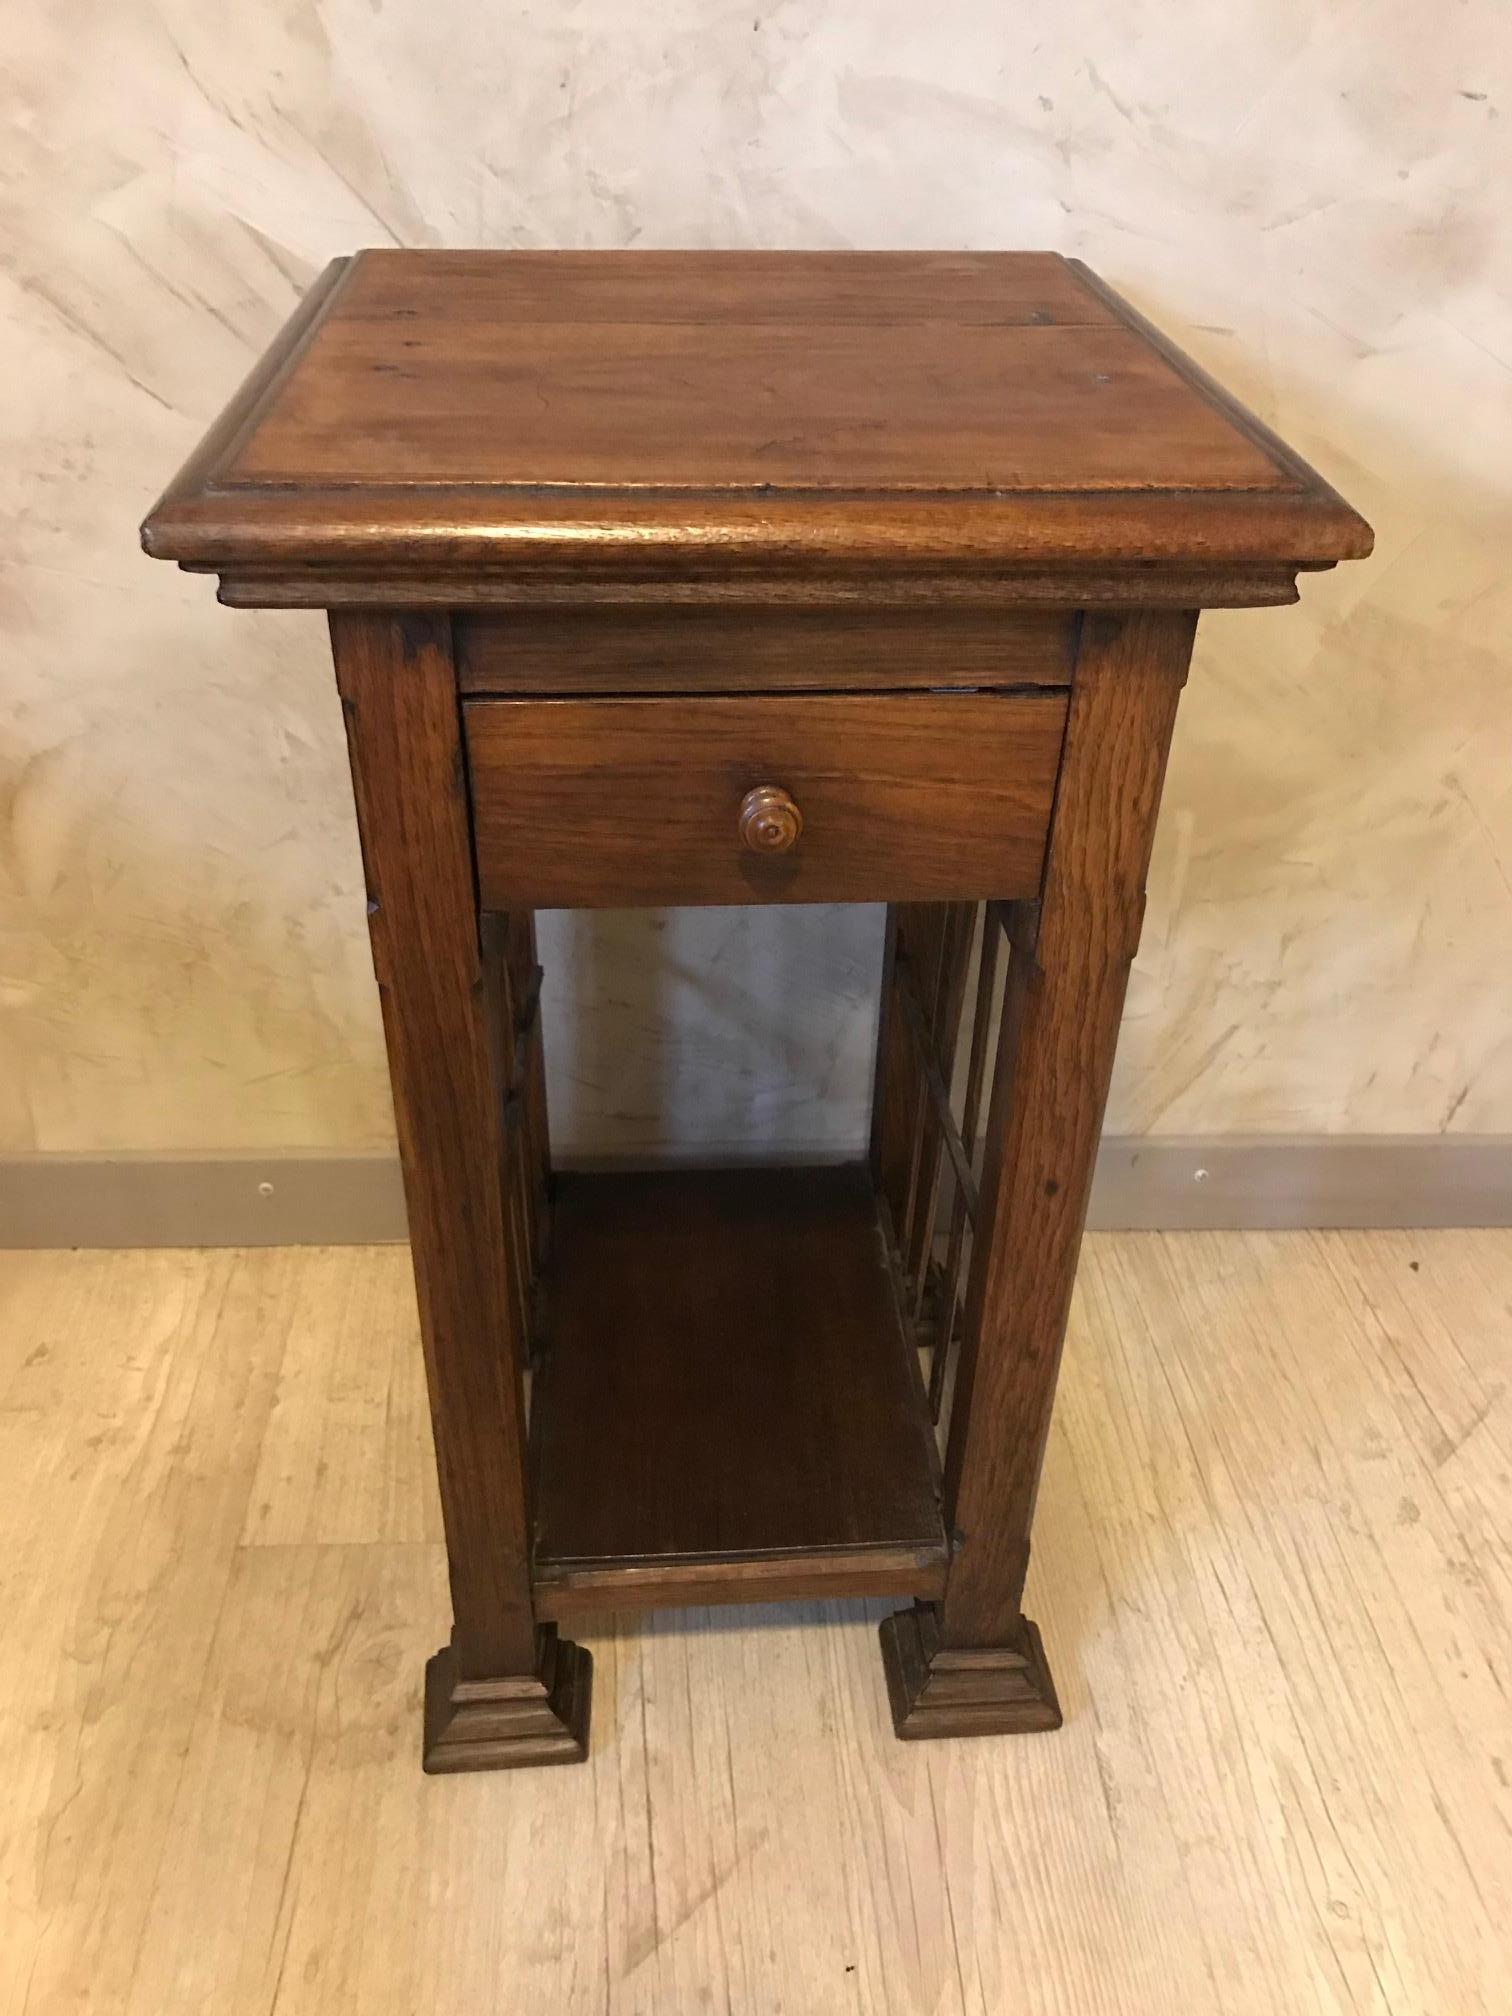 Very nice 20th century French oak side table from the 1920s.
Nice quality and condition. A drawer.
Can be used to put a statue or a lamp.